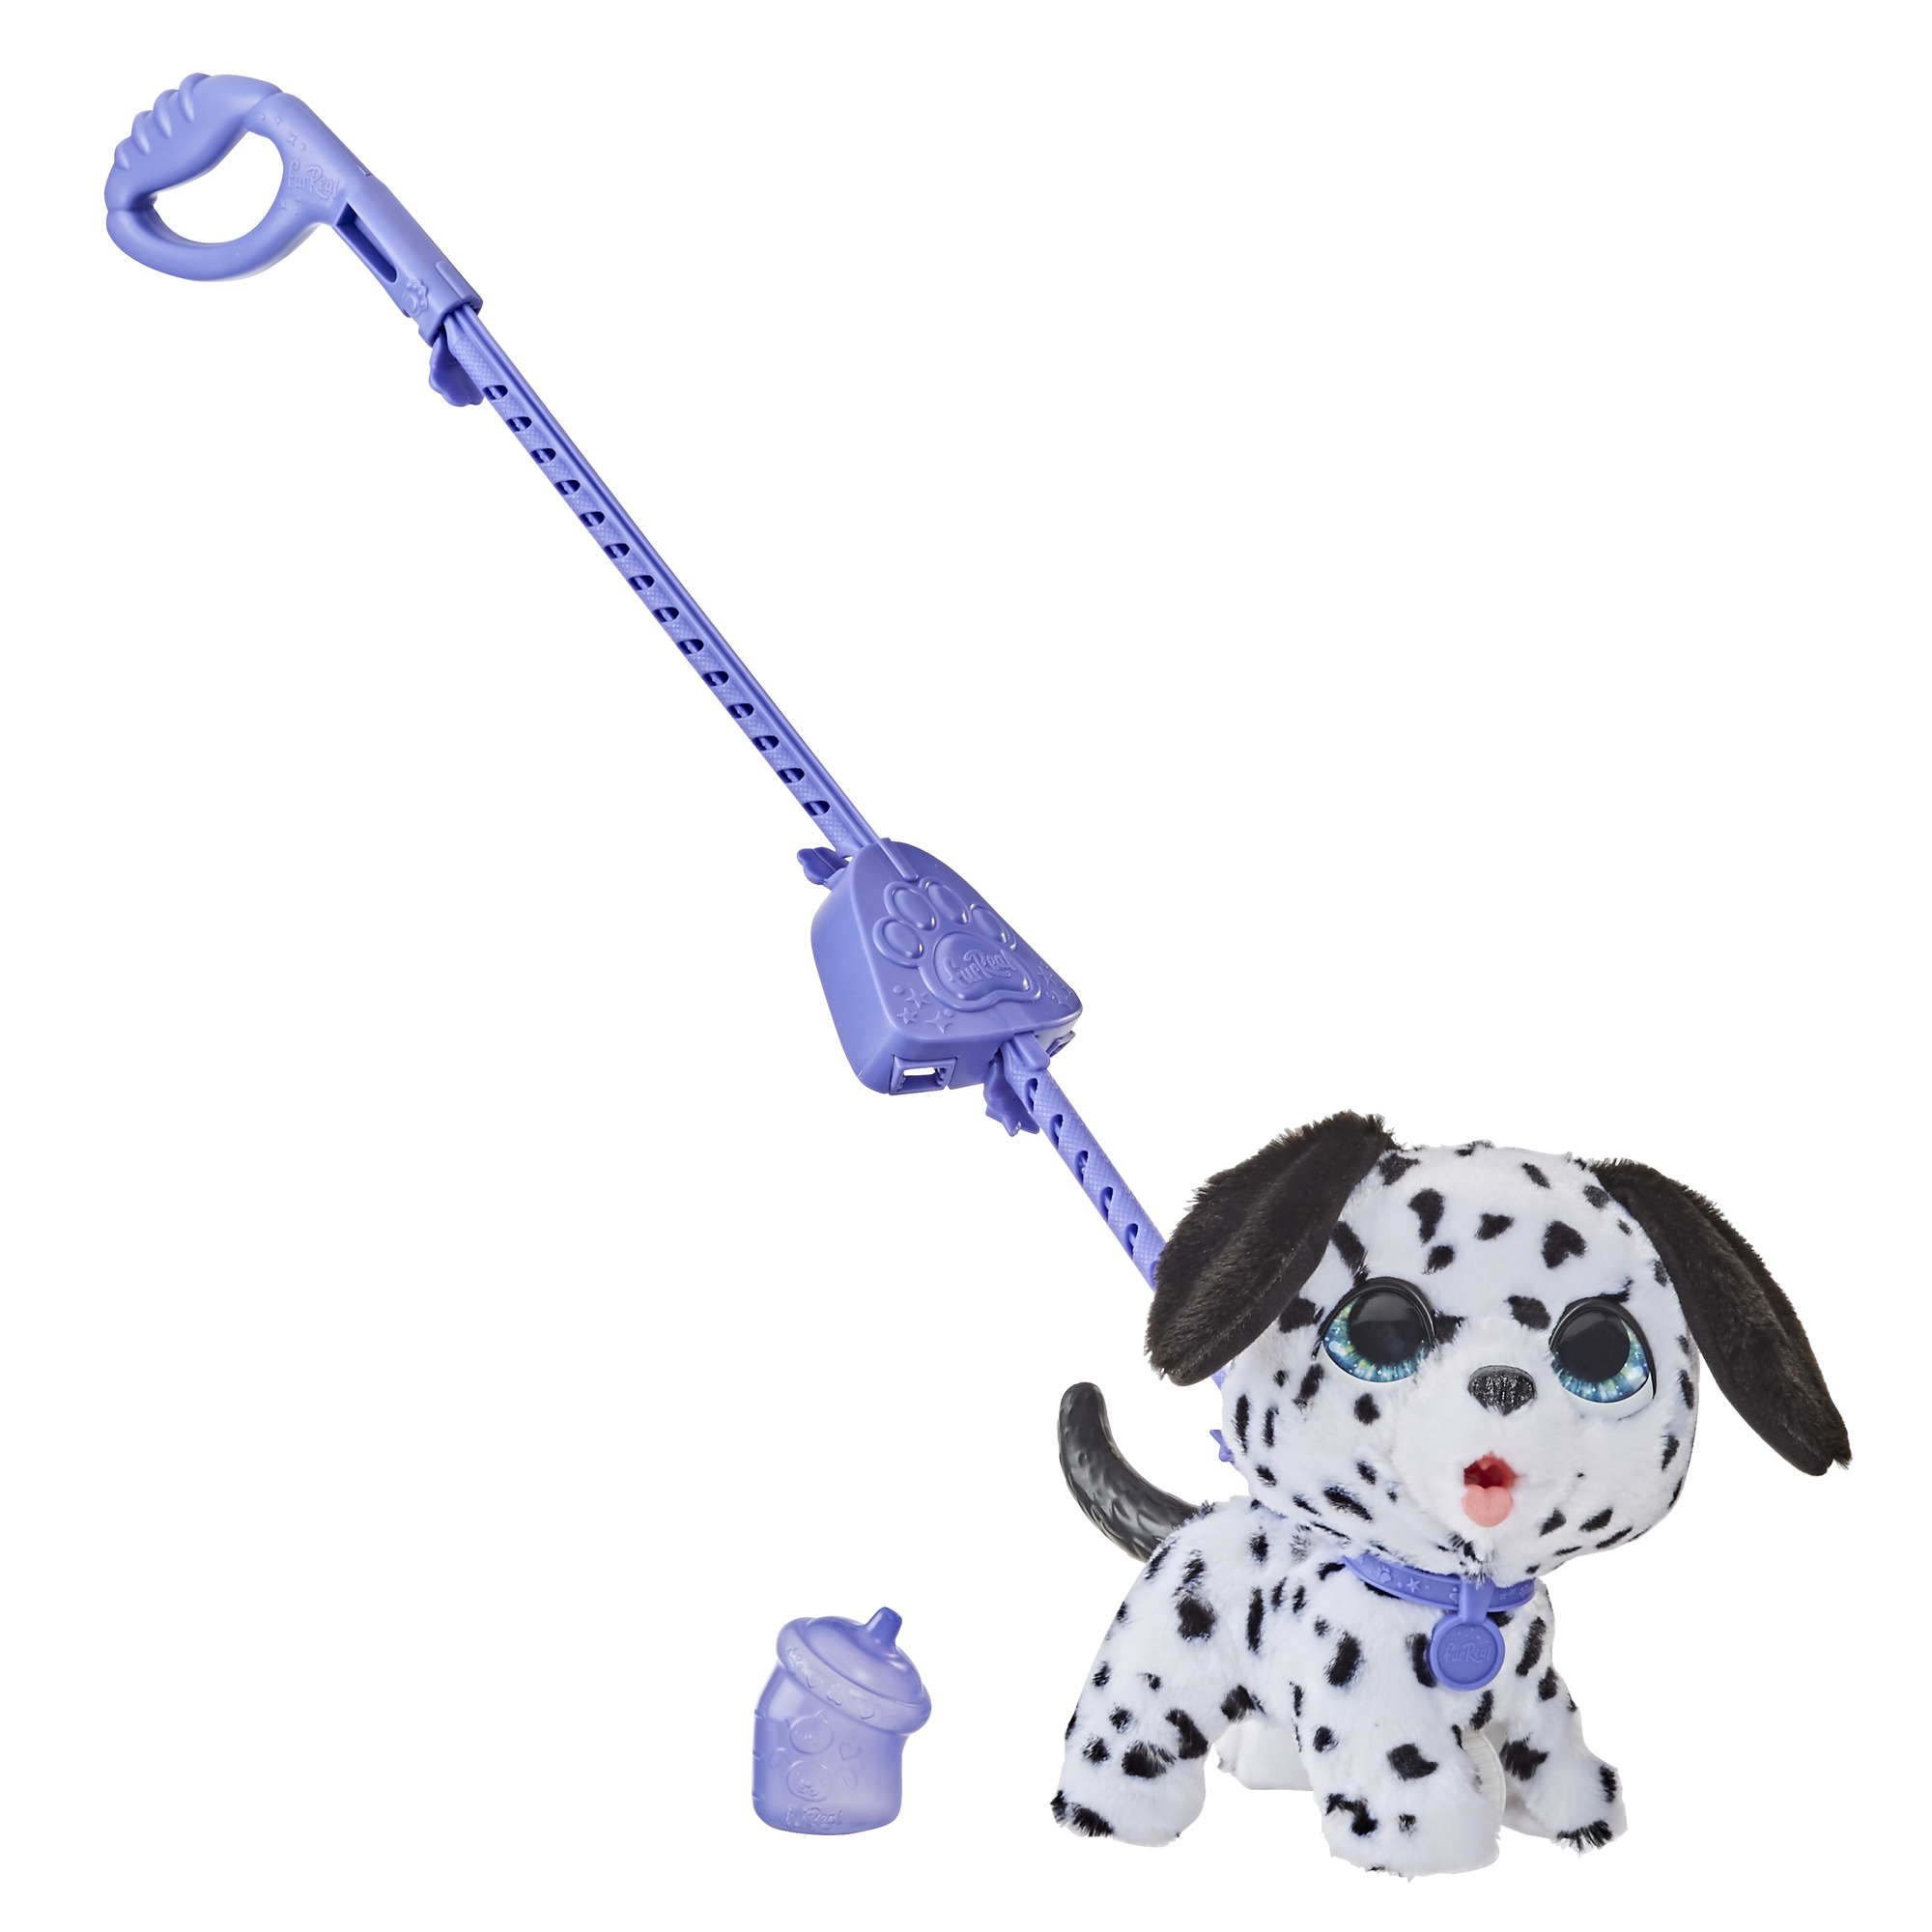 FurReal Poopalots Interactive Electronic Pet Dalmatian Kids Toy for Boys and Girls - image 1 of 8